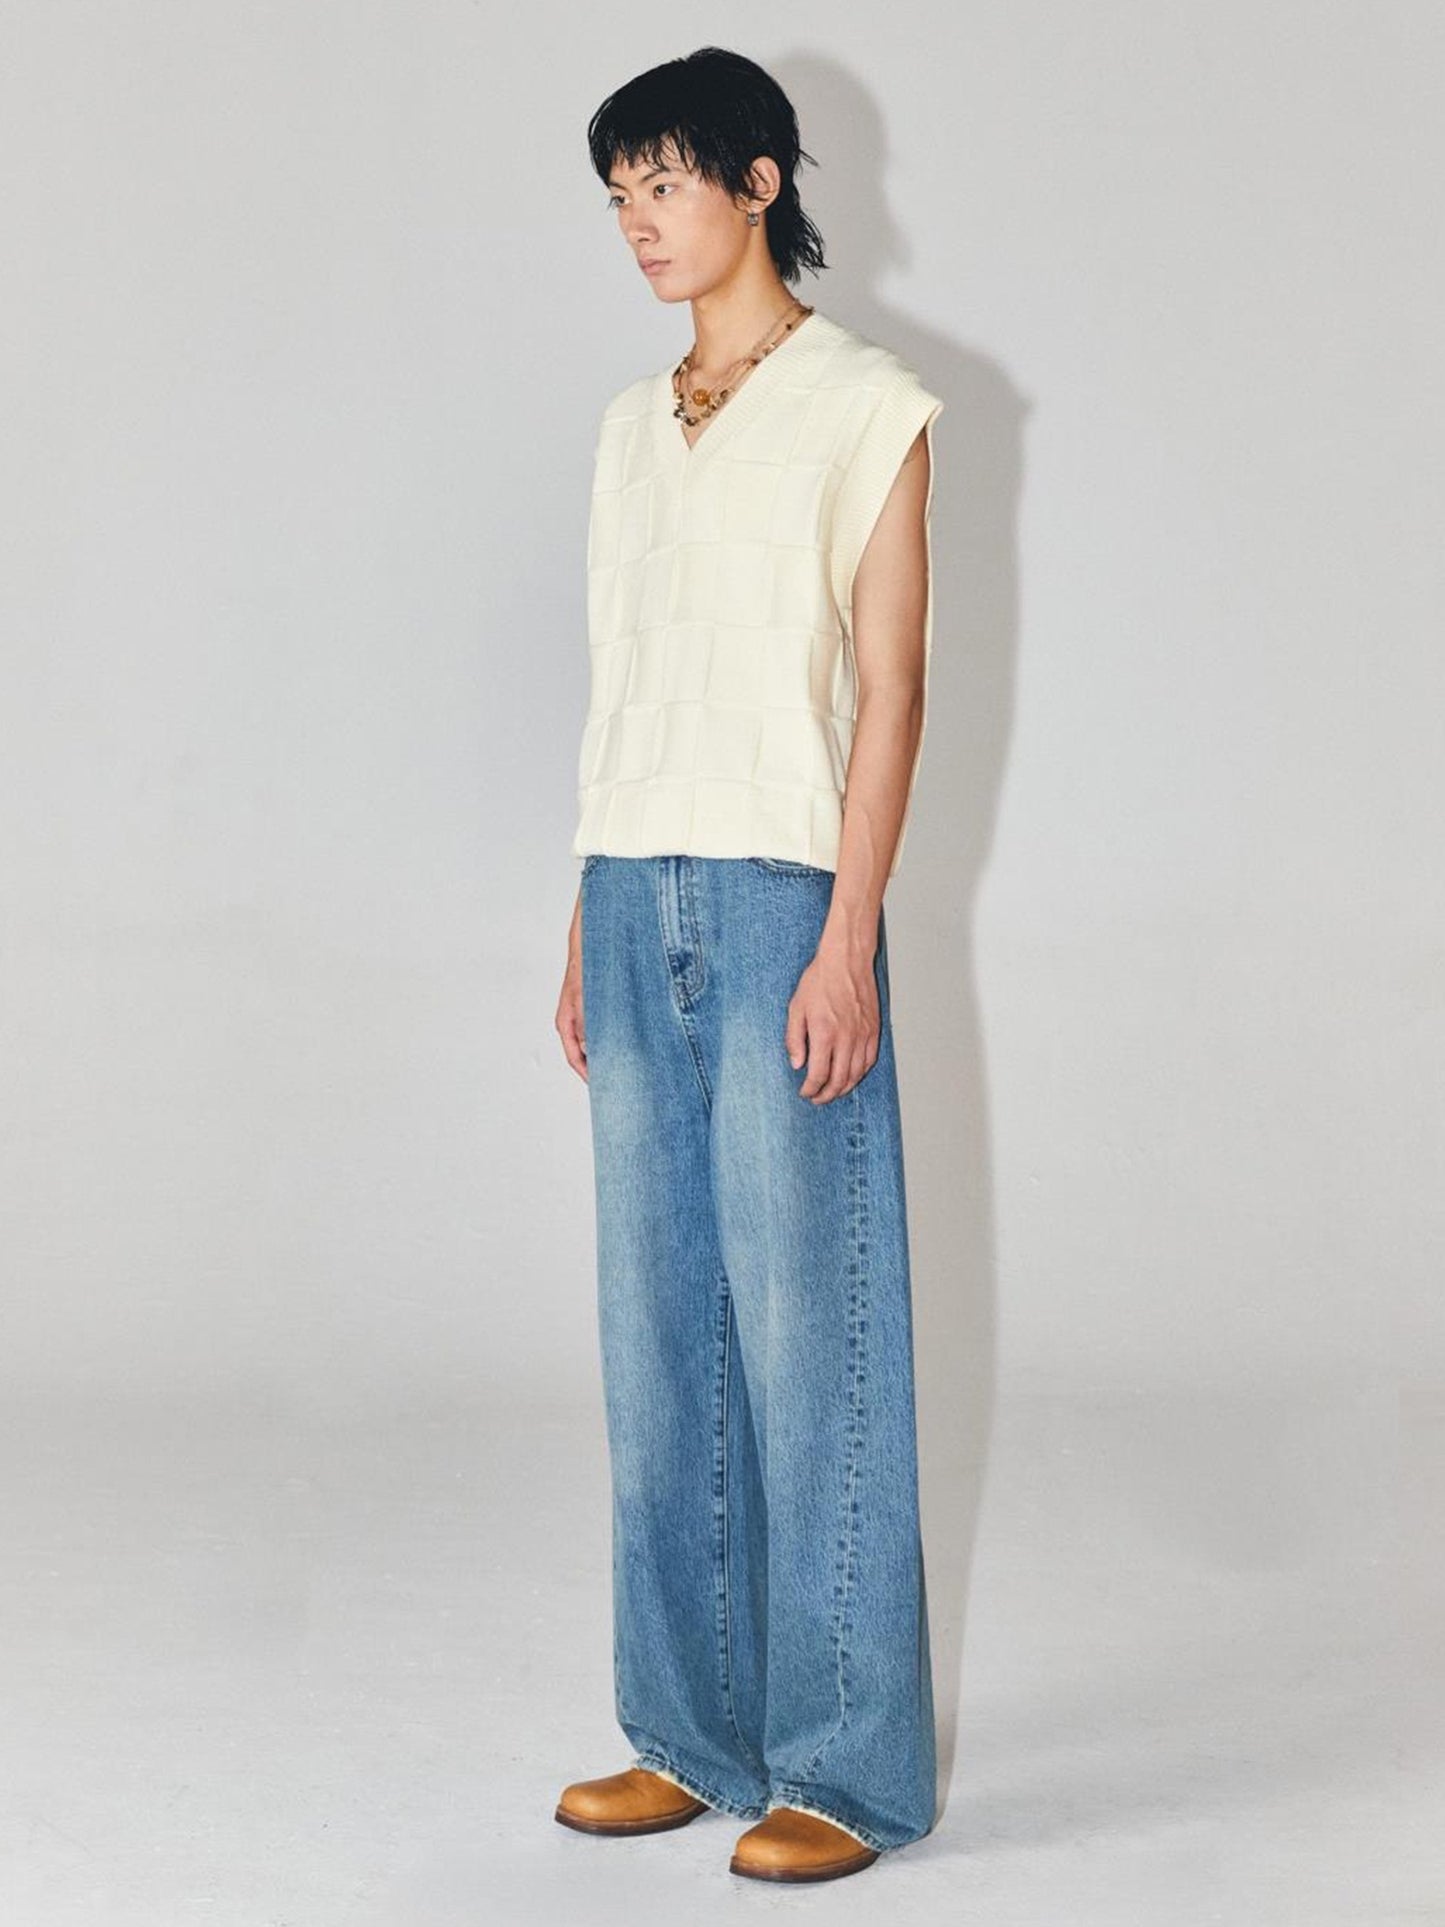 Wide Leg Washed Jeans